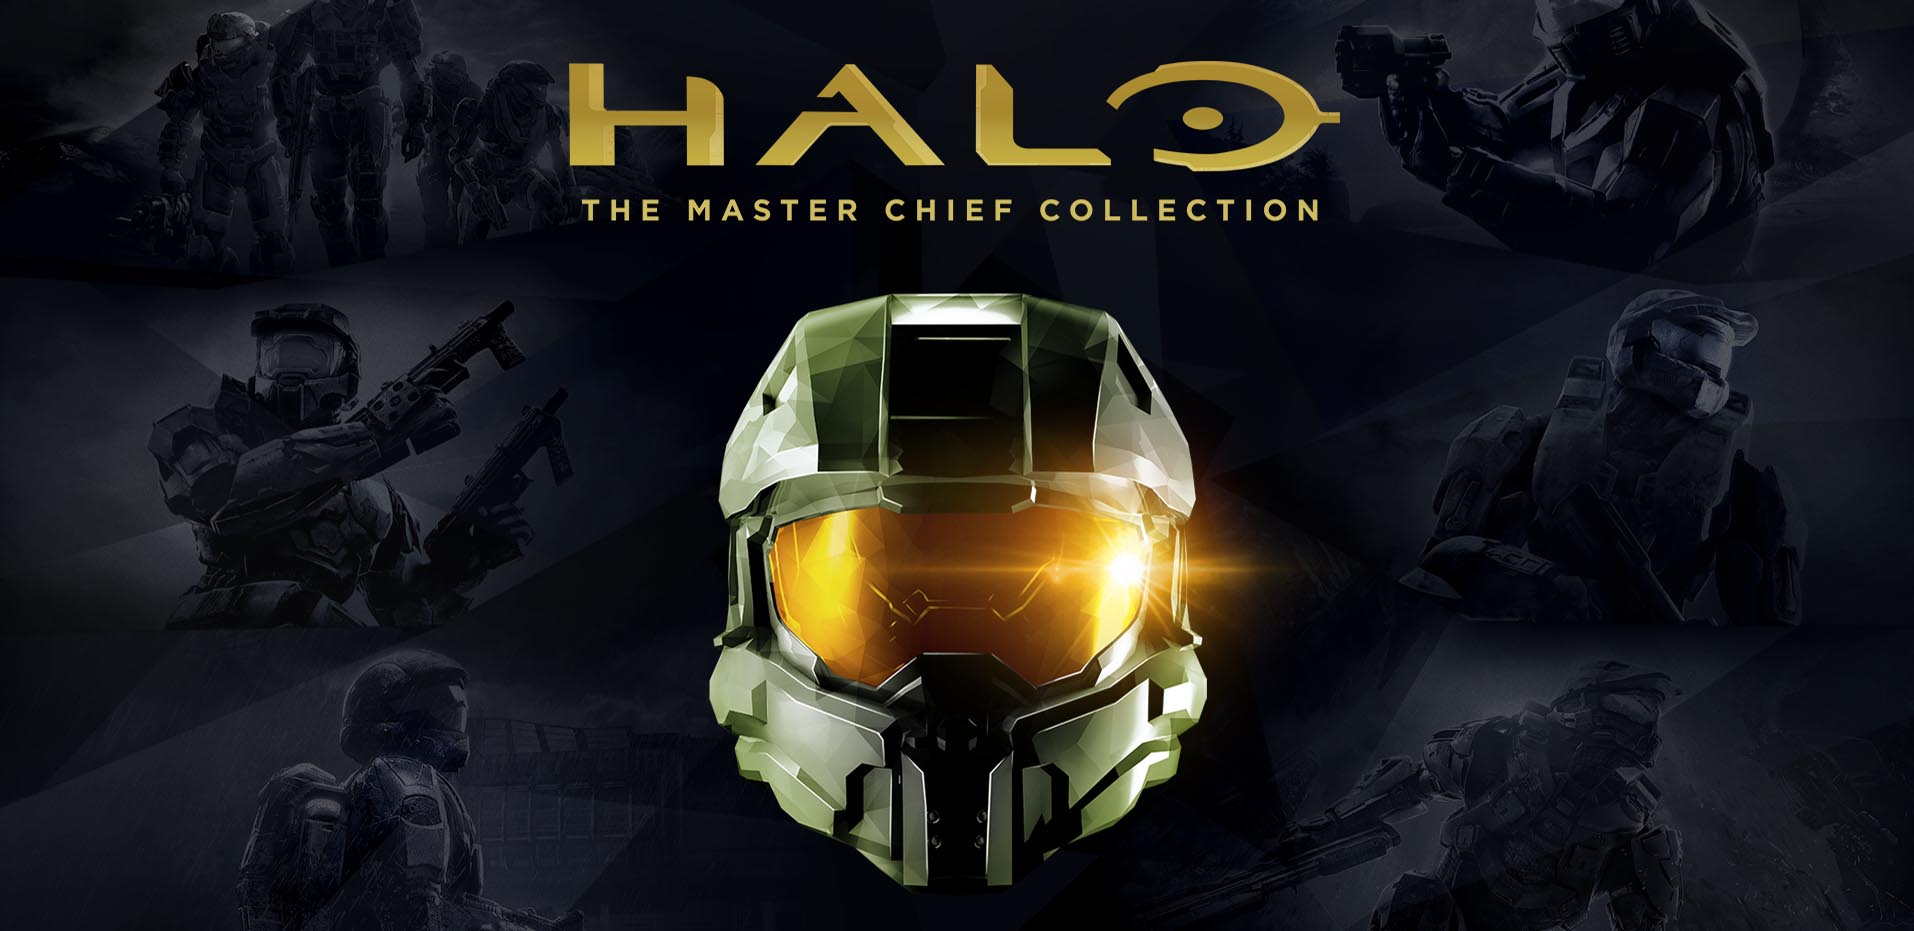 Halo: The Master Chief Collection logo and helmet